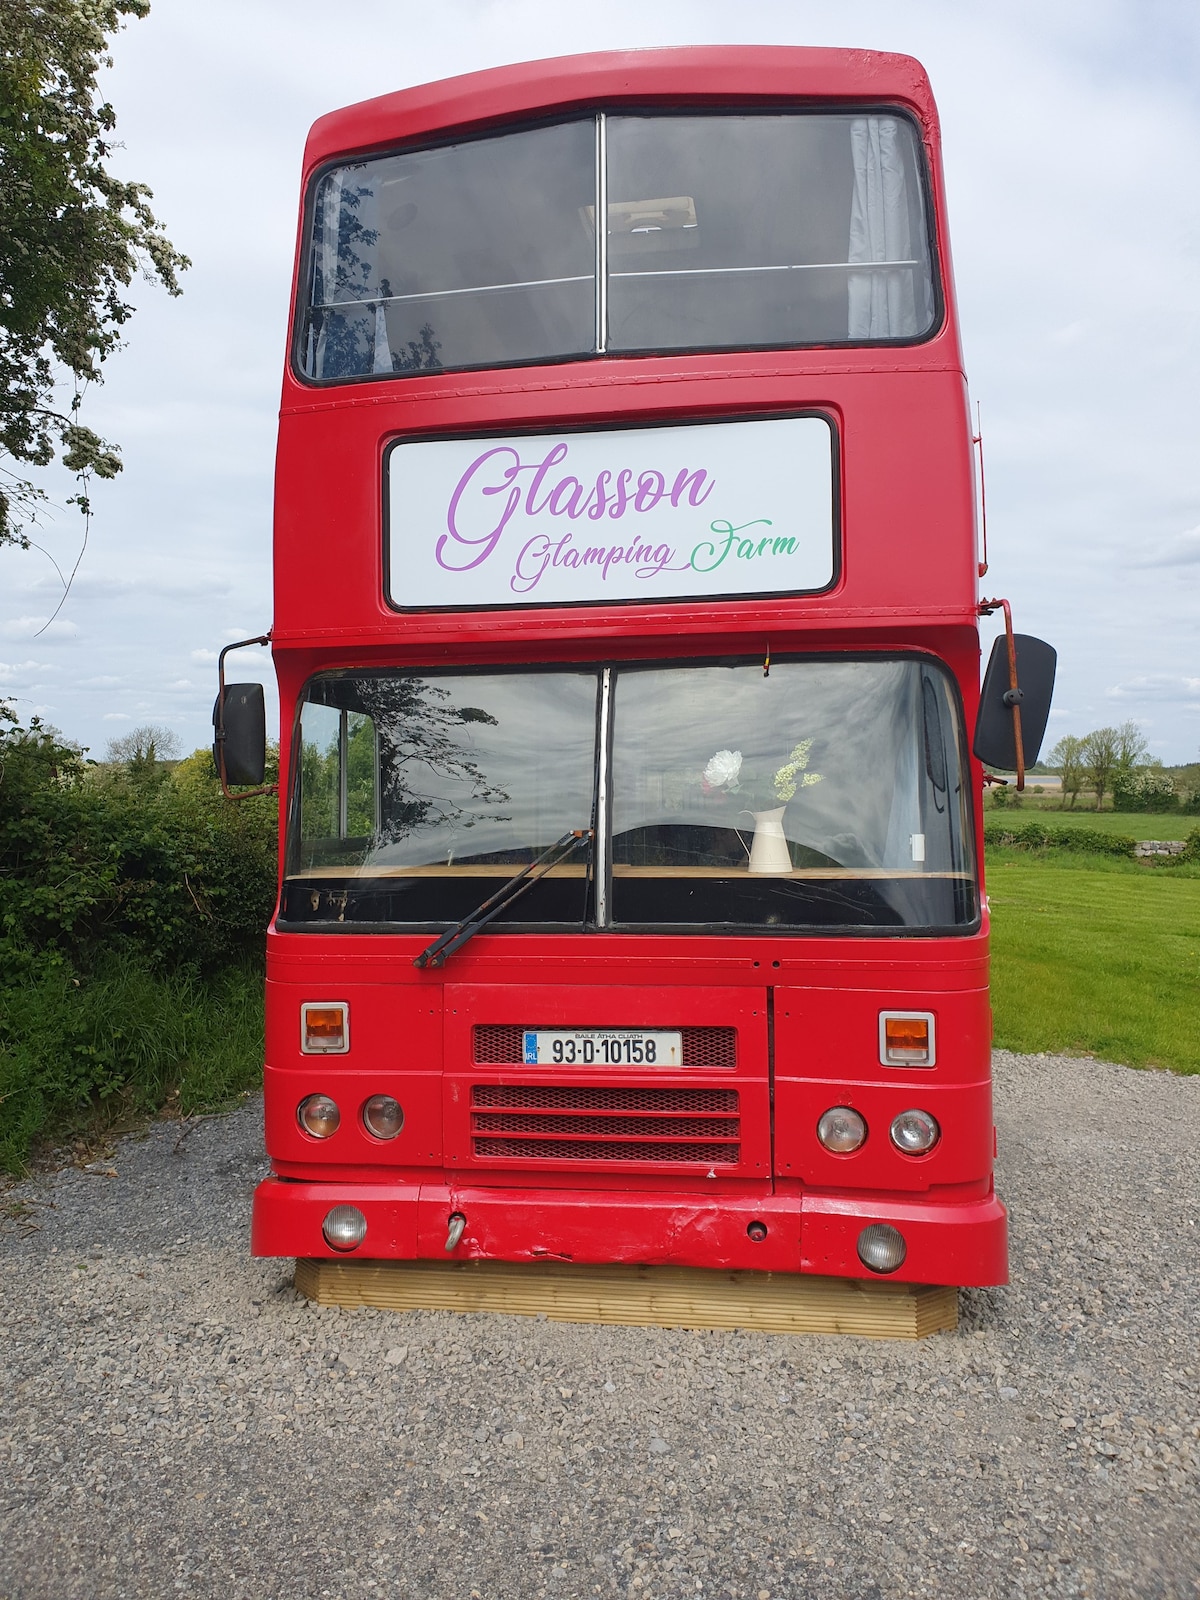 The Big Red Bus at Glasson Glamping Farm